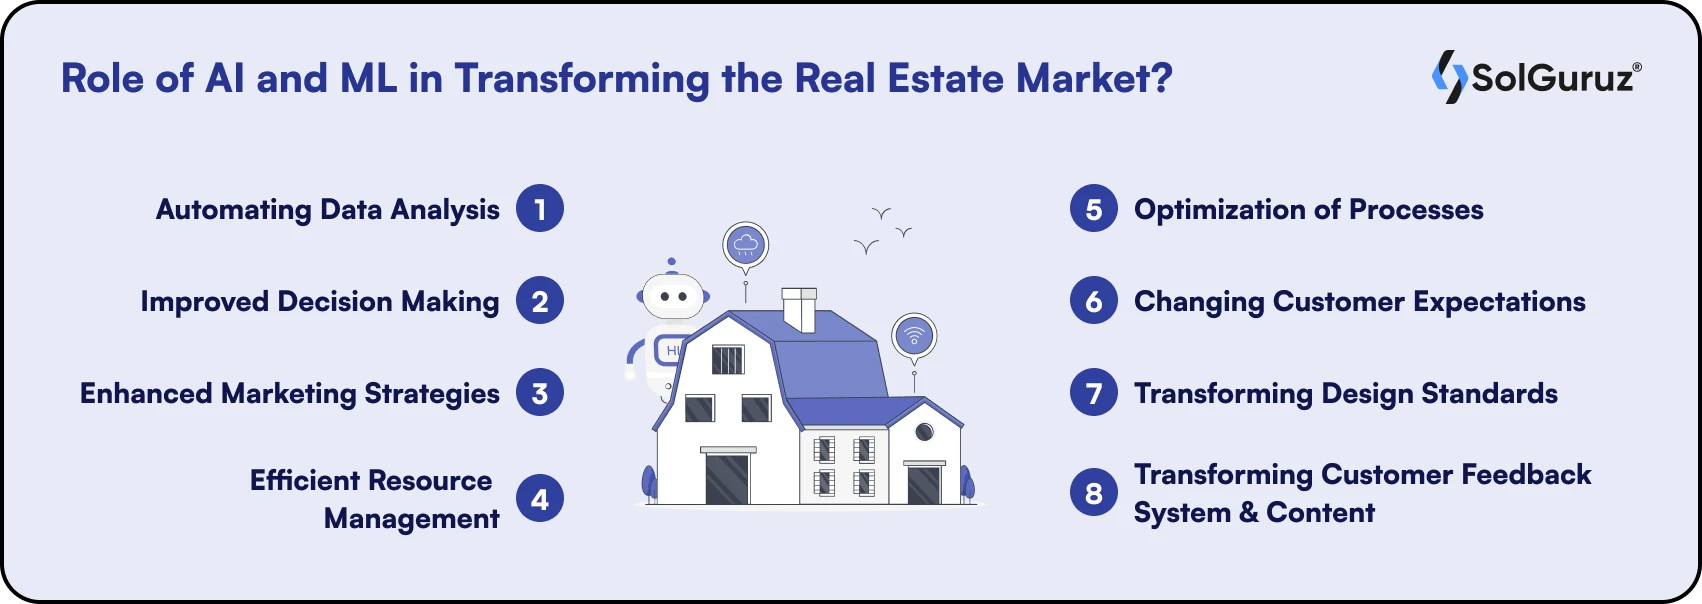 What is the Role of AI and ML in Transforming the Real Estate Market